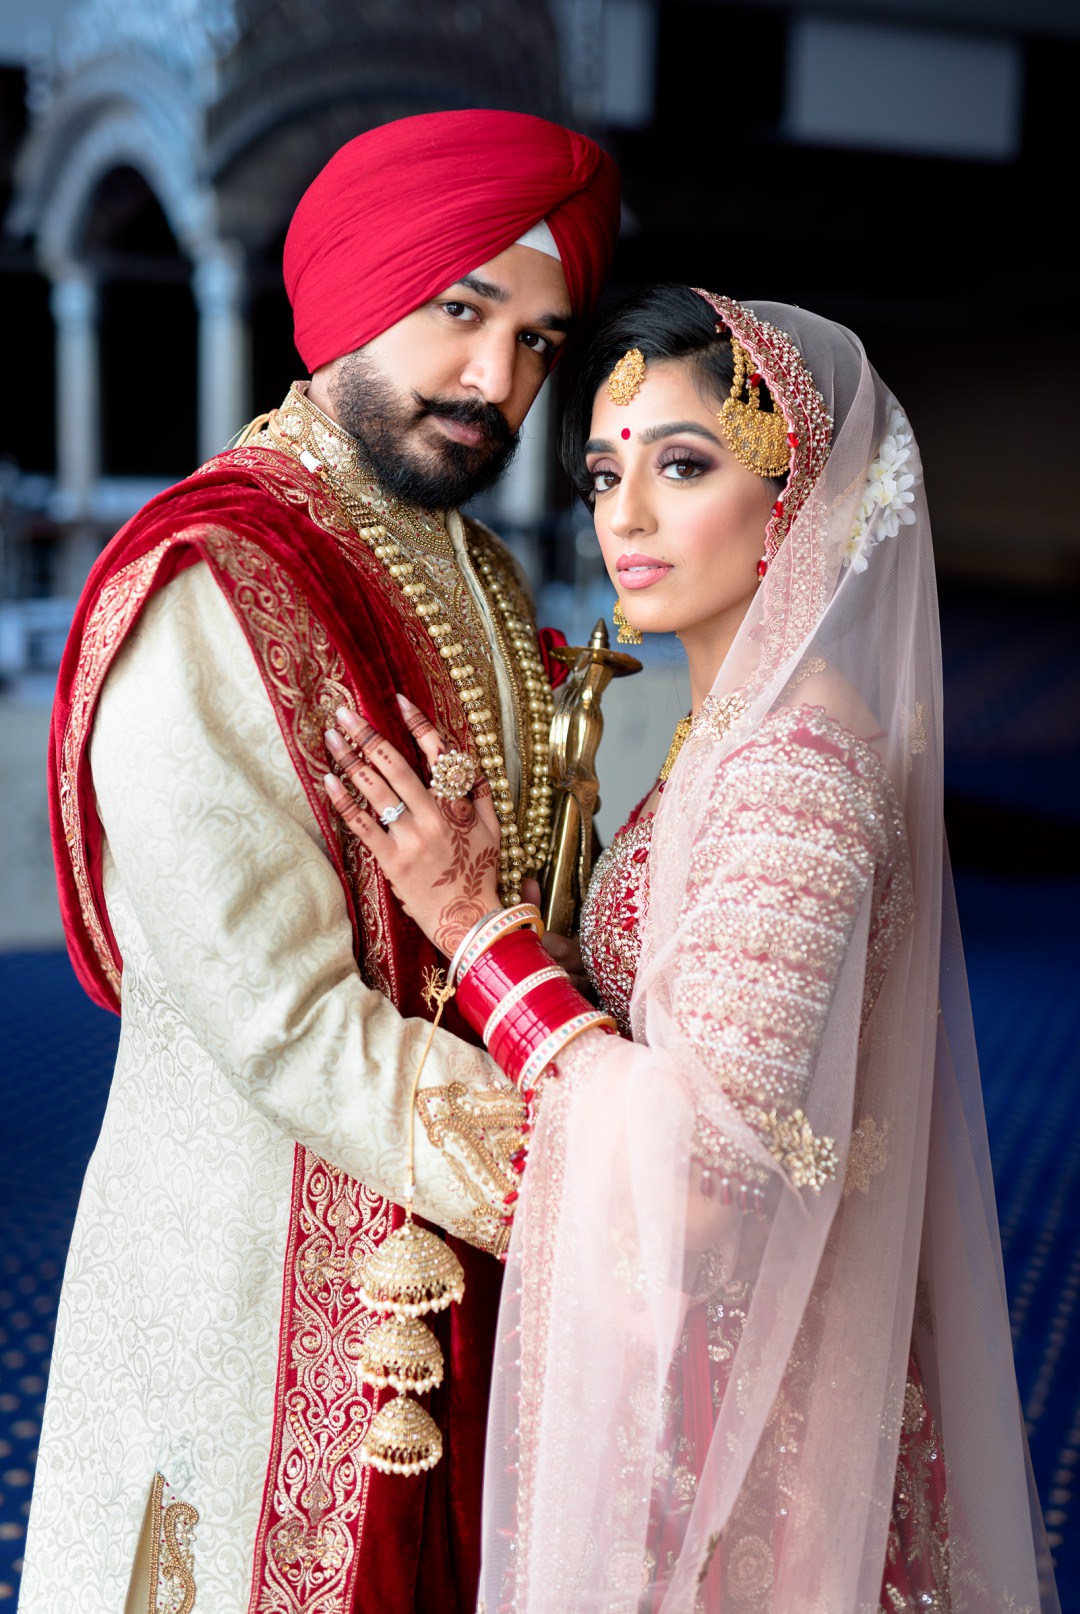 Couple portraits in at a Havelock Road Gurdwara wedding